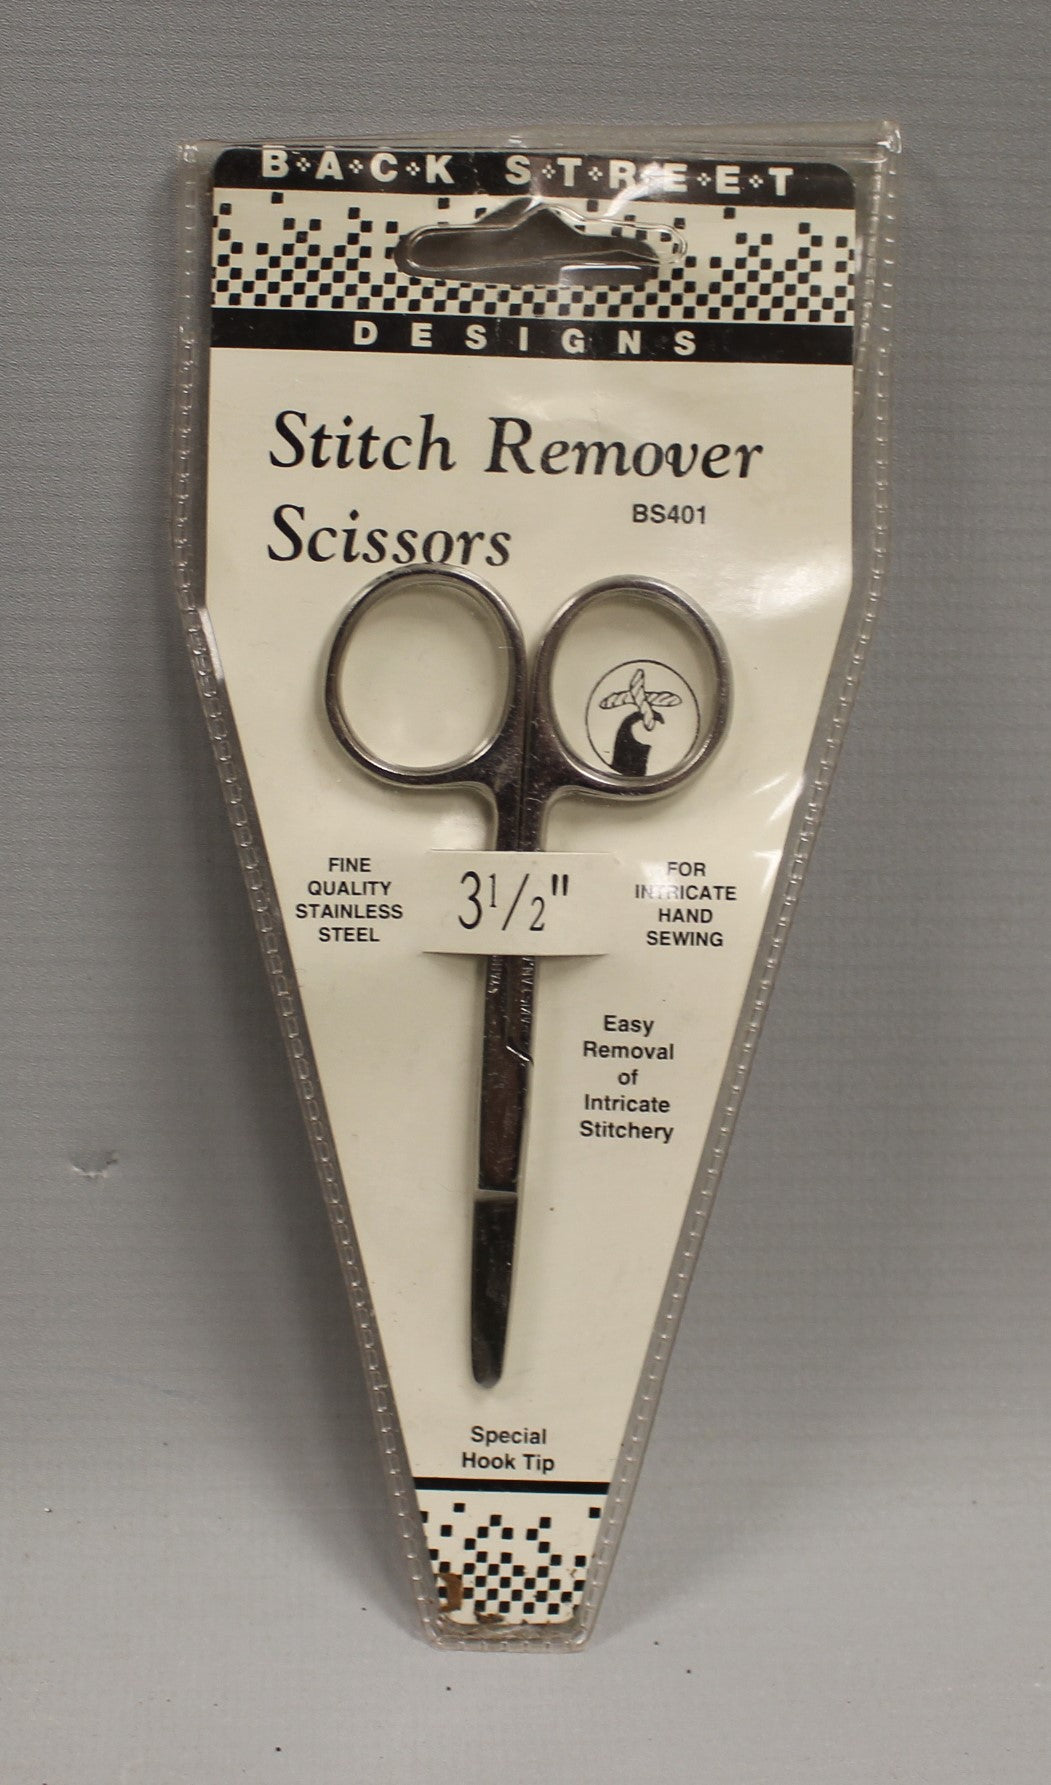 Back Street Designs Stitch Remover Scissors - 3.5 - BS401 - New – Military  Steals and Surplus